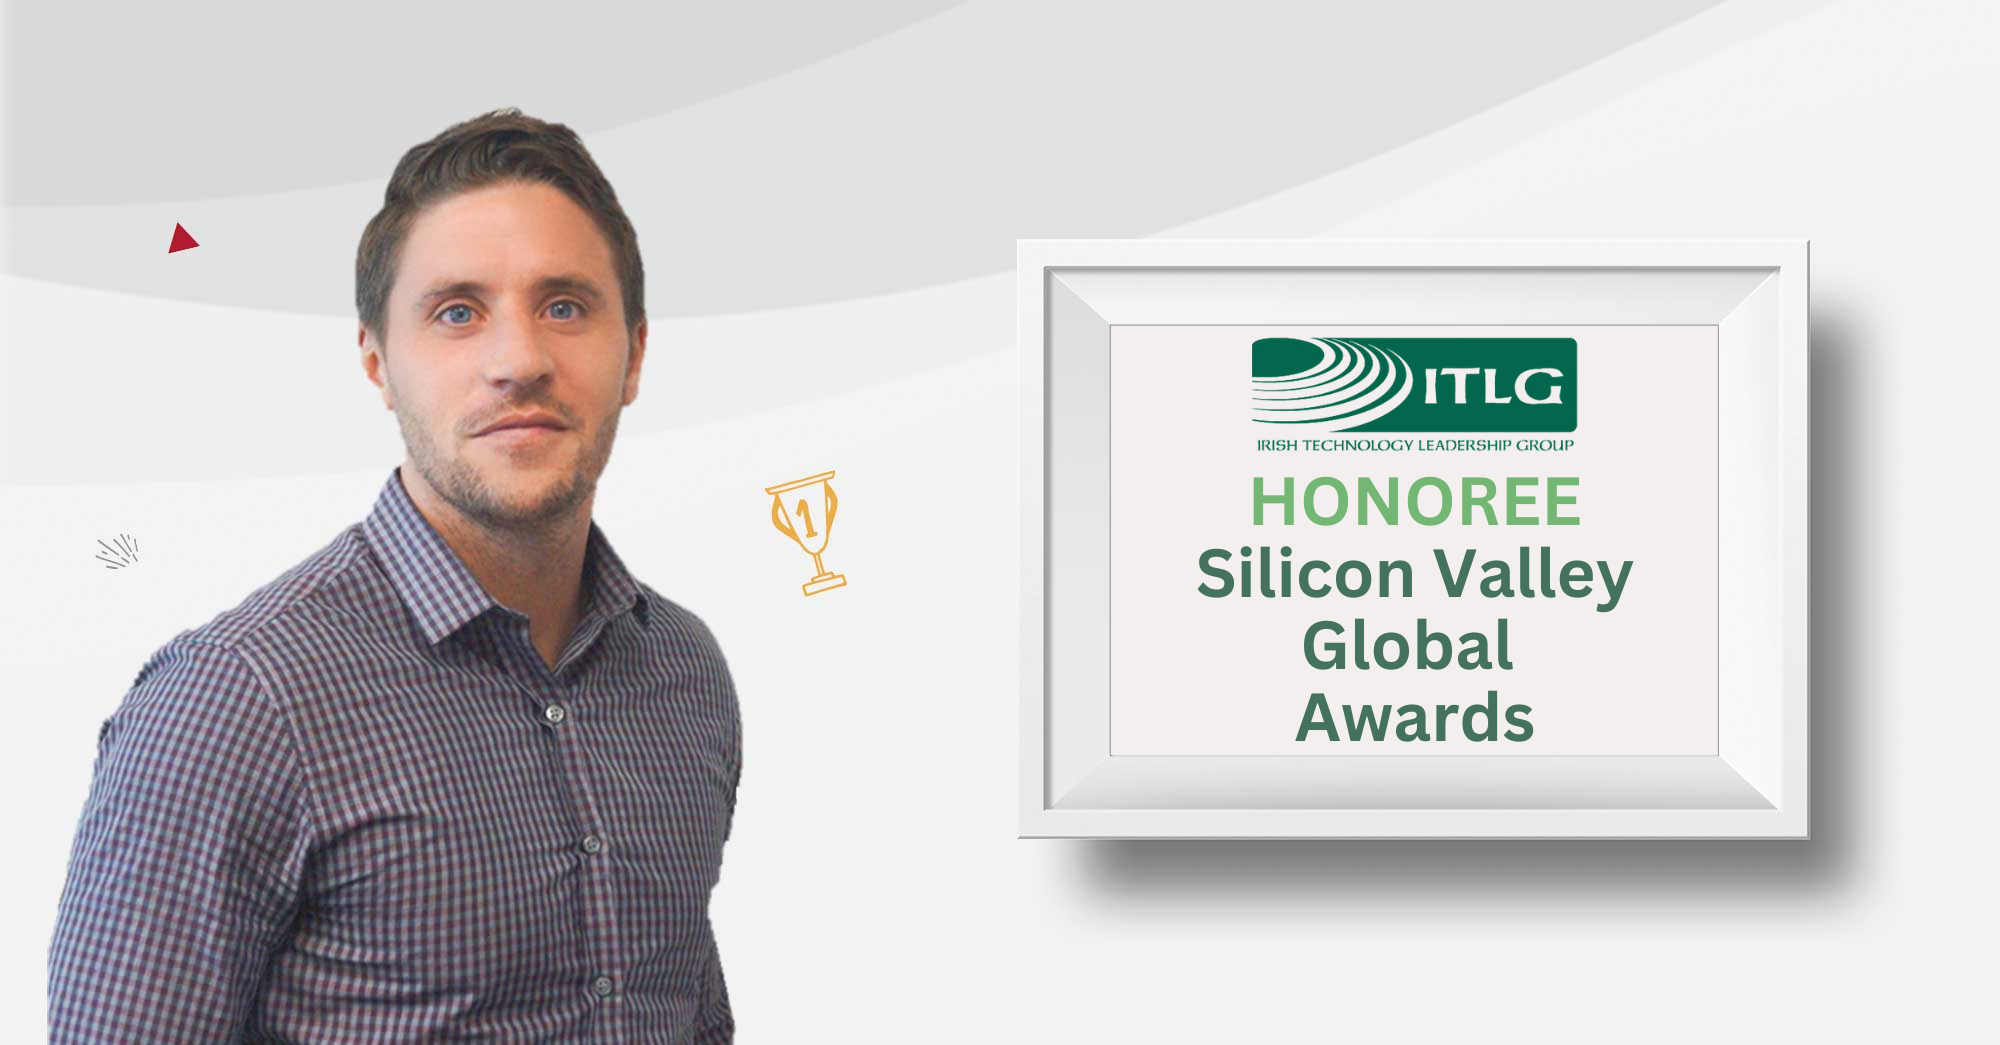 Silicon Valley Global Award for our Managing Director North America